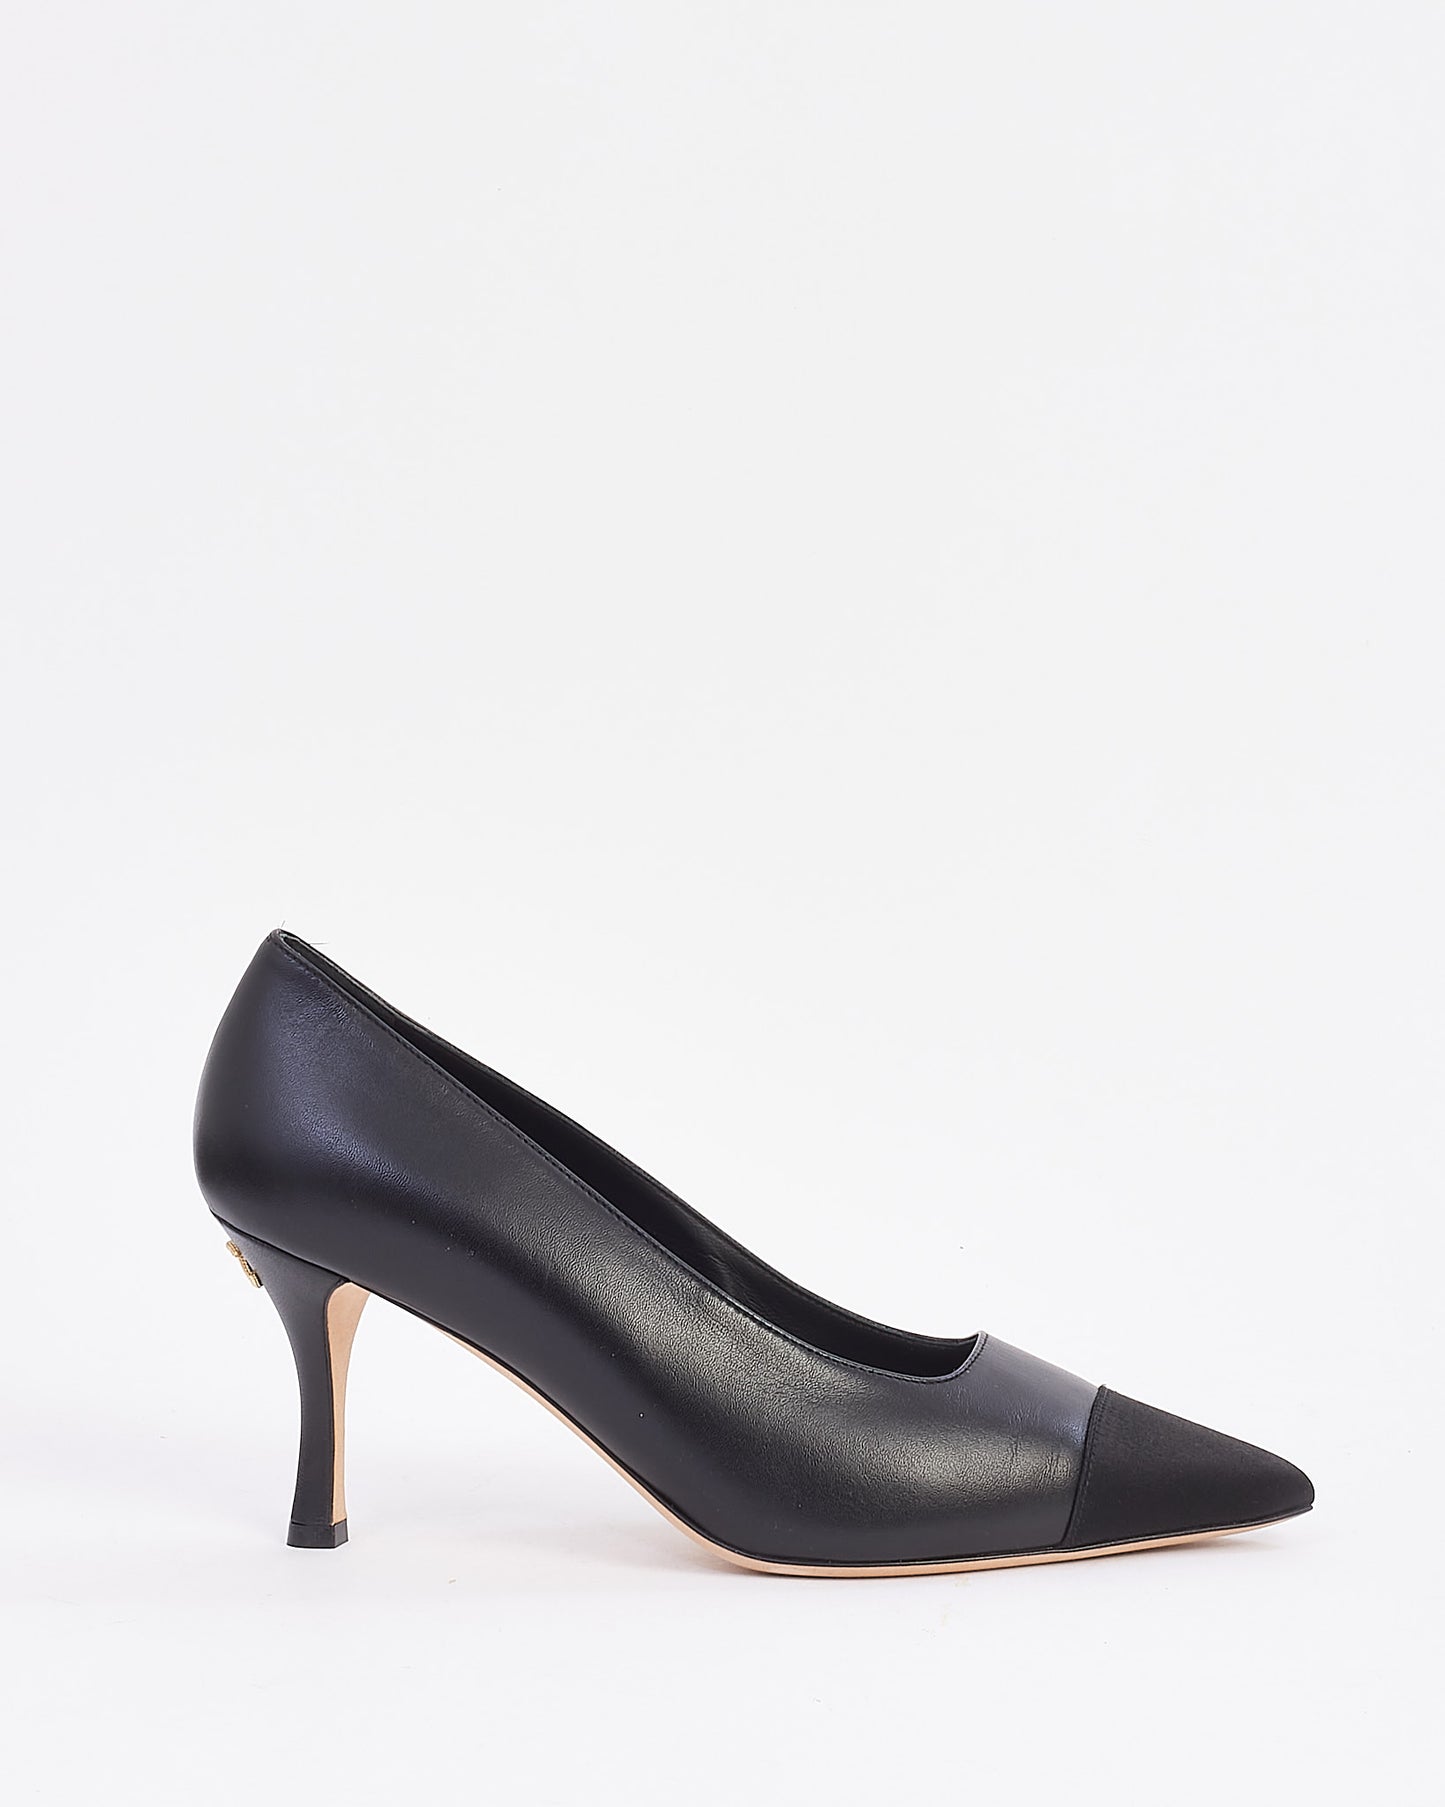 Chanel Black Lambskin Leather CC Heel Pointed Toe Pumps - 39.5